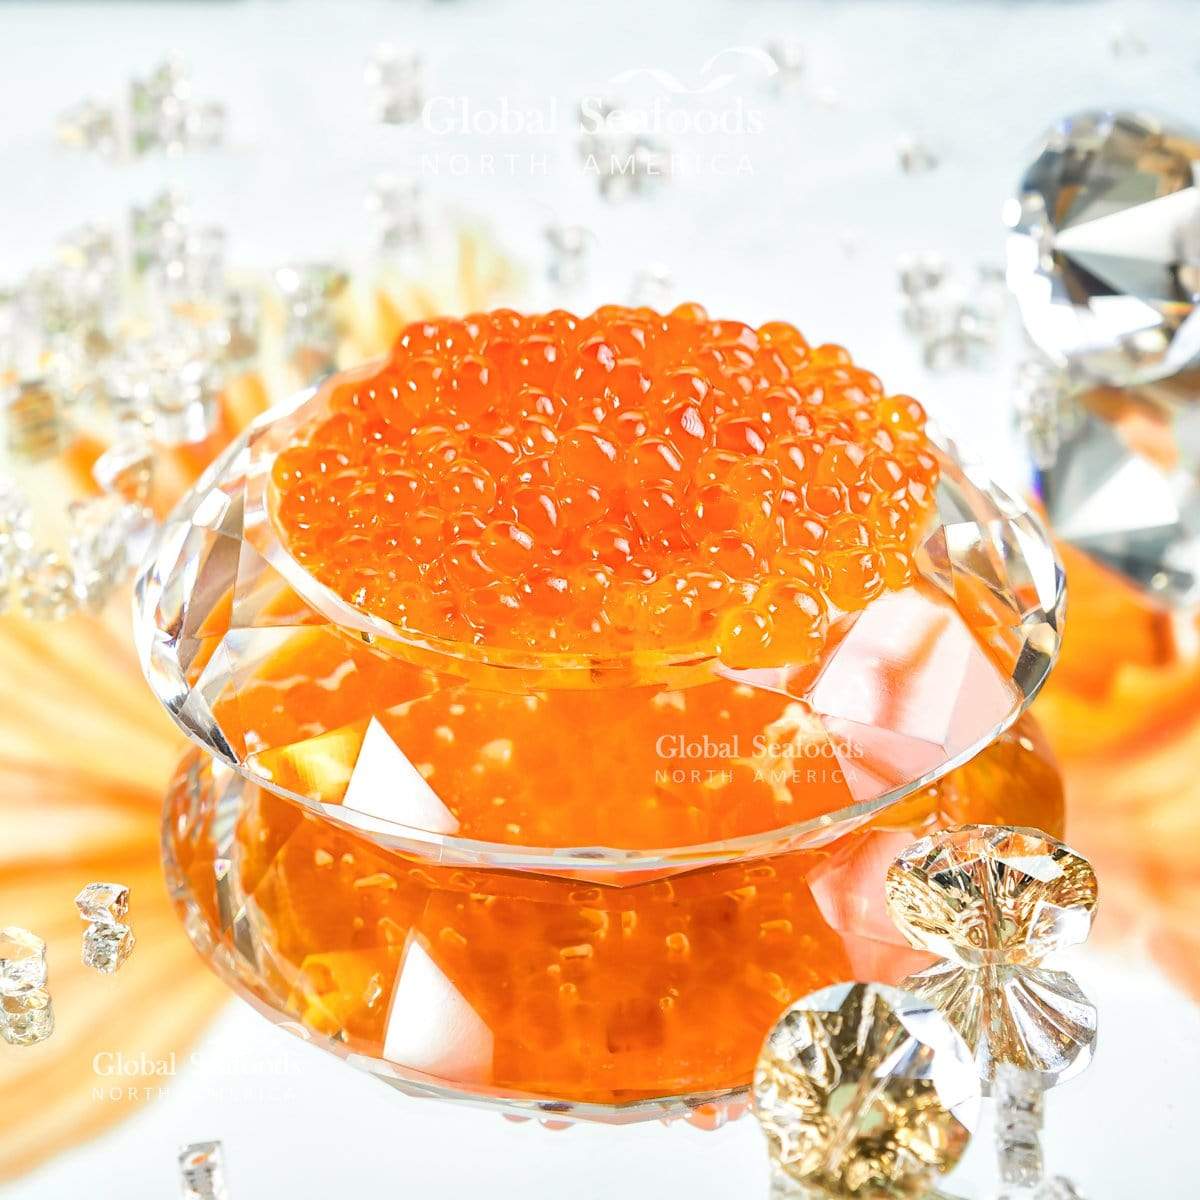 A vibrant photo of premium Ikura (Chum Salmon Roe) in a jar, showcasing the glossy, orange roe with its distinctively large and succulent beads, ready for culinary use